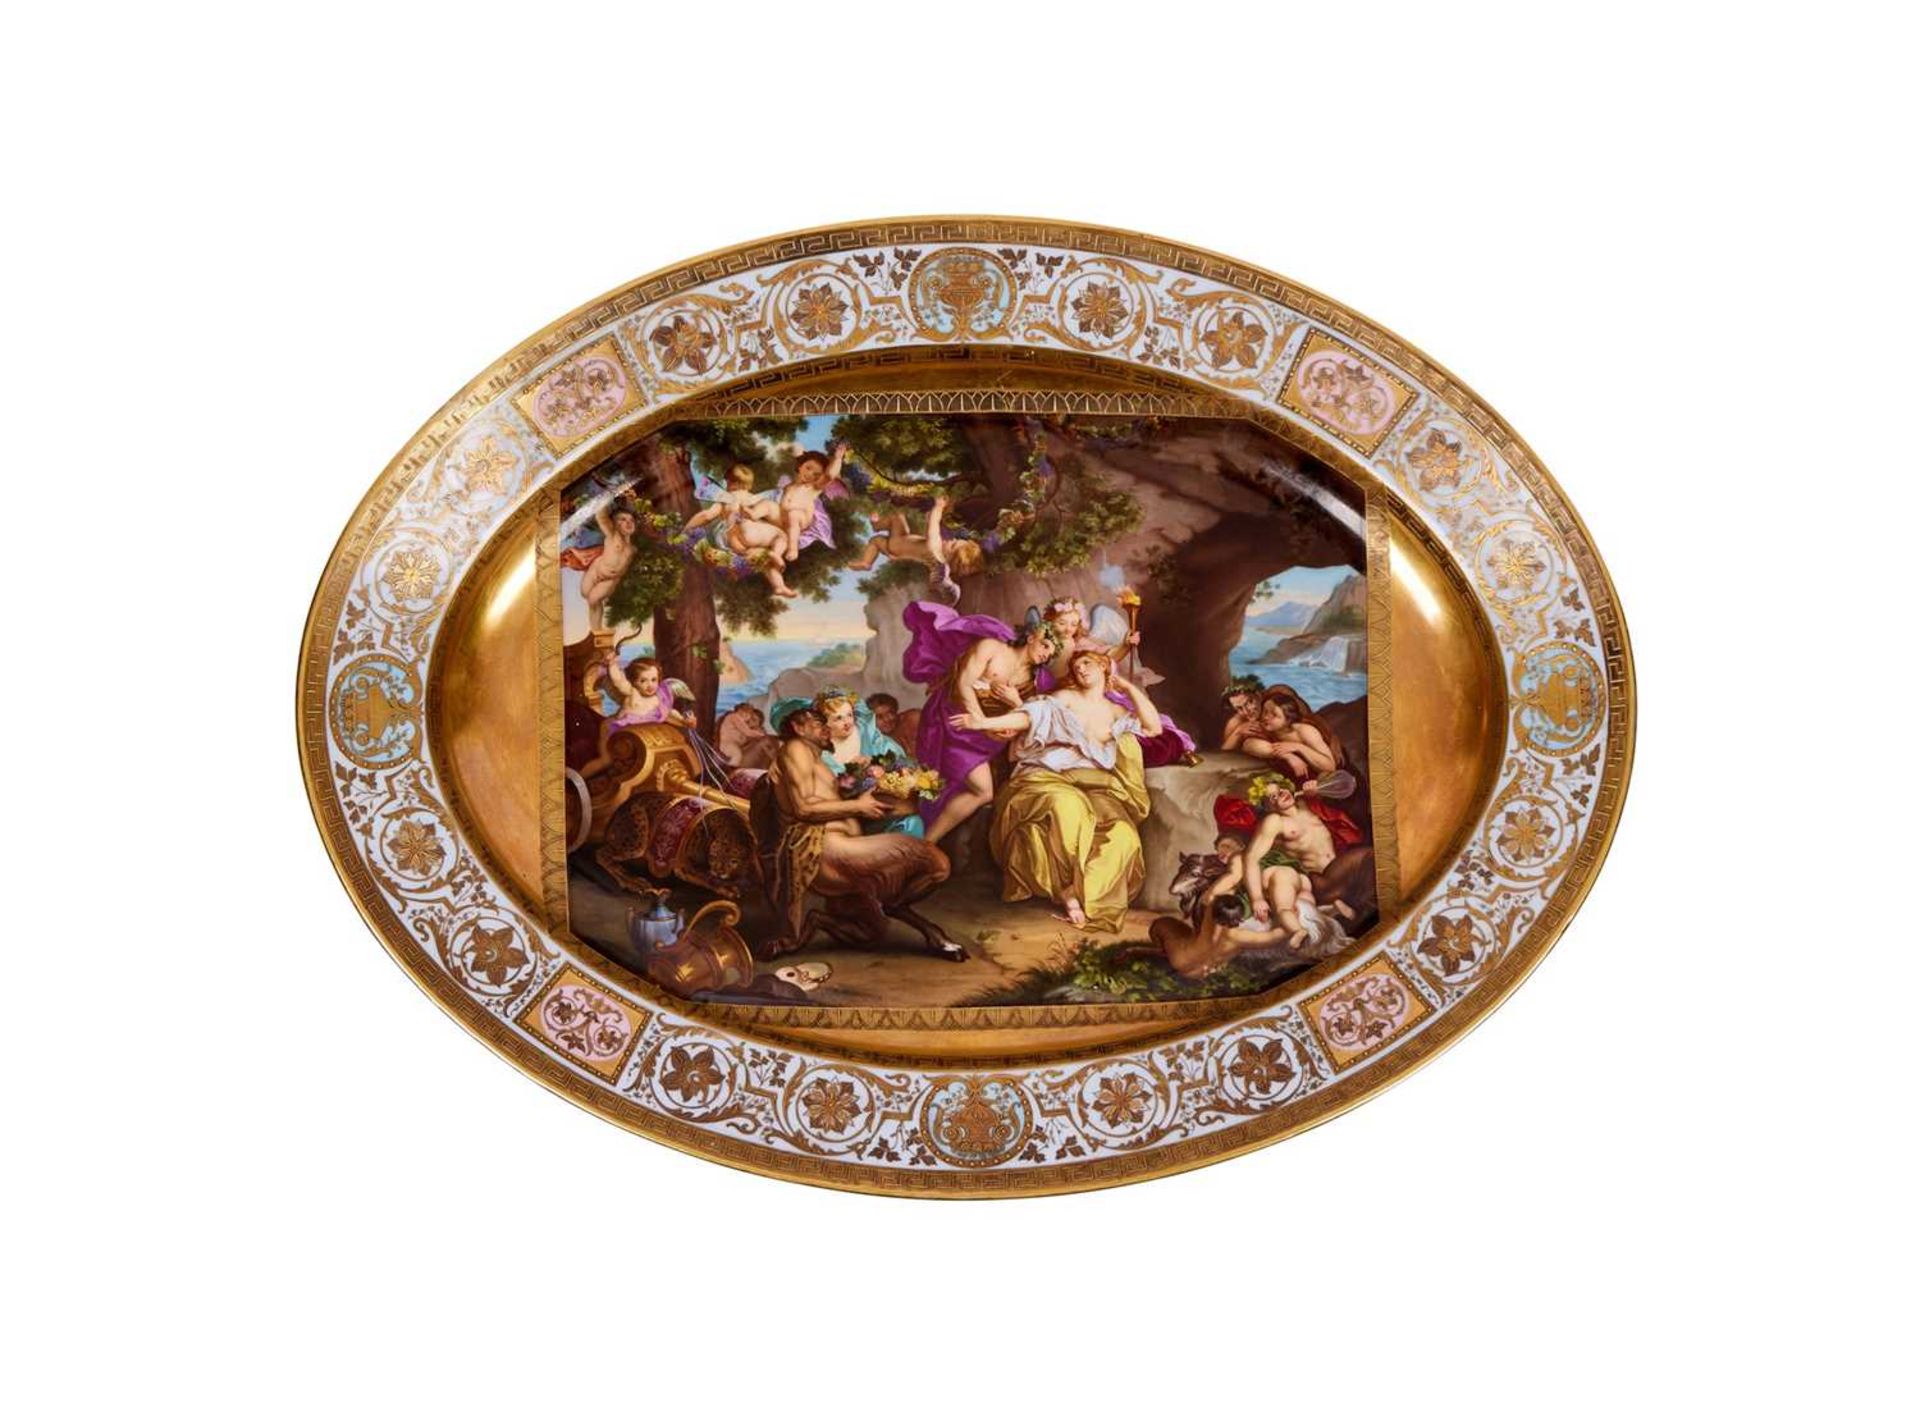 A FINE AND LARGE 19TH CENTURY VIENNA PORCELAIN DISH DEPICTING BACCHUS AND ARIADNE - Image 3 of 5